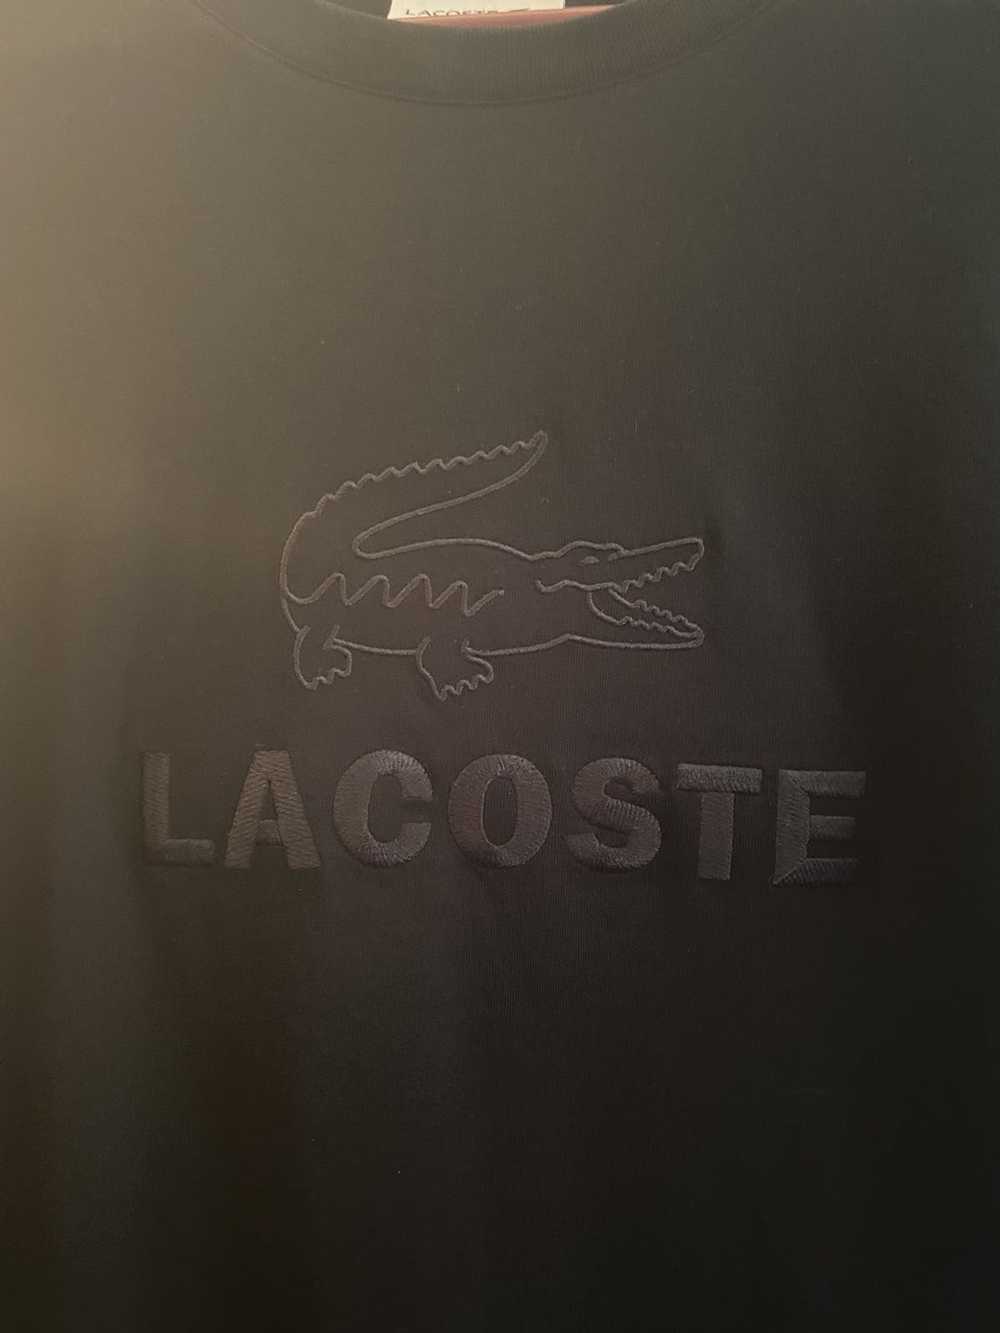 Lacoste Lacoste Block Letter Brand Tee - image 2